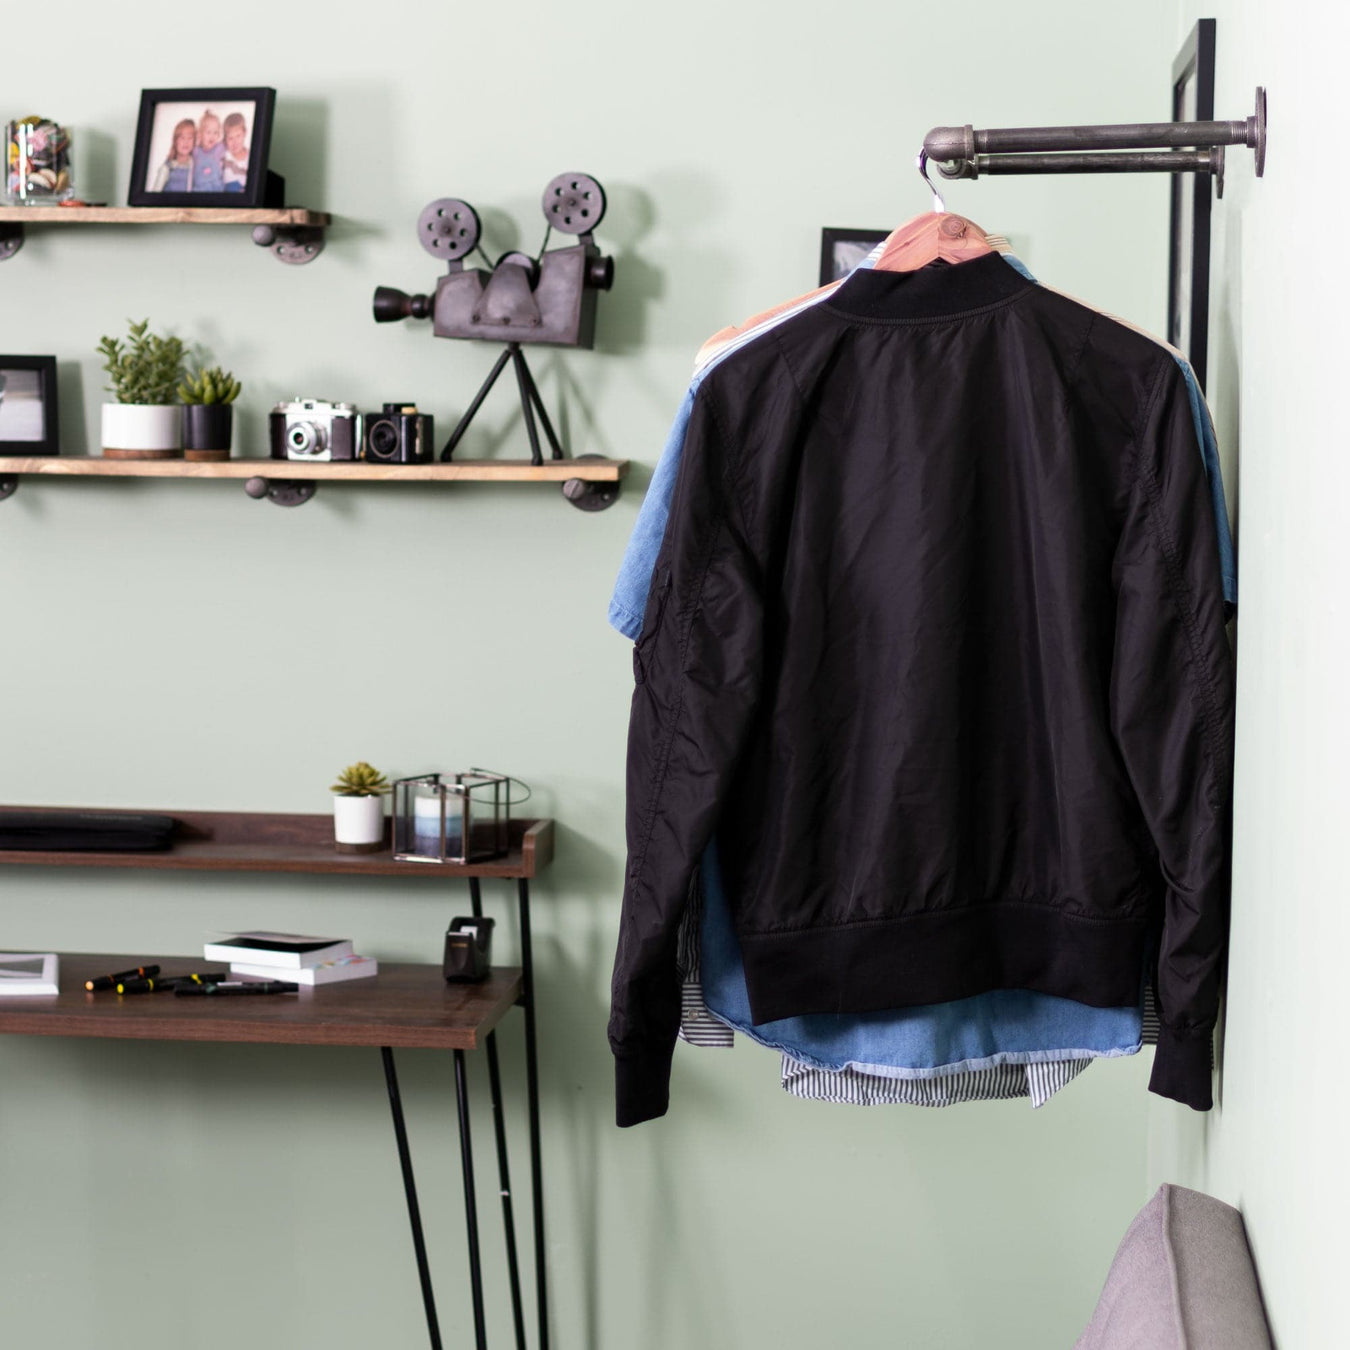 Image of pipe clothing rack hanging on wall